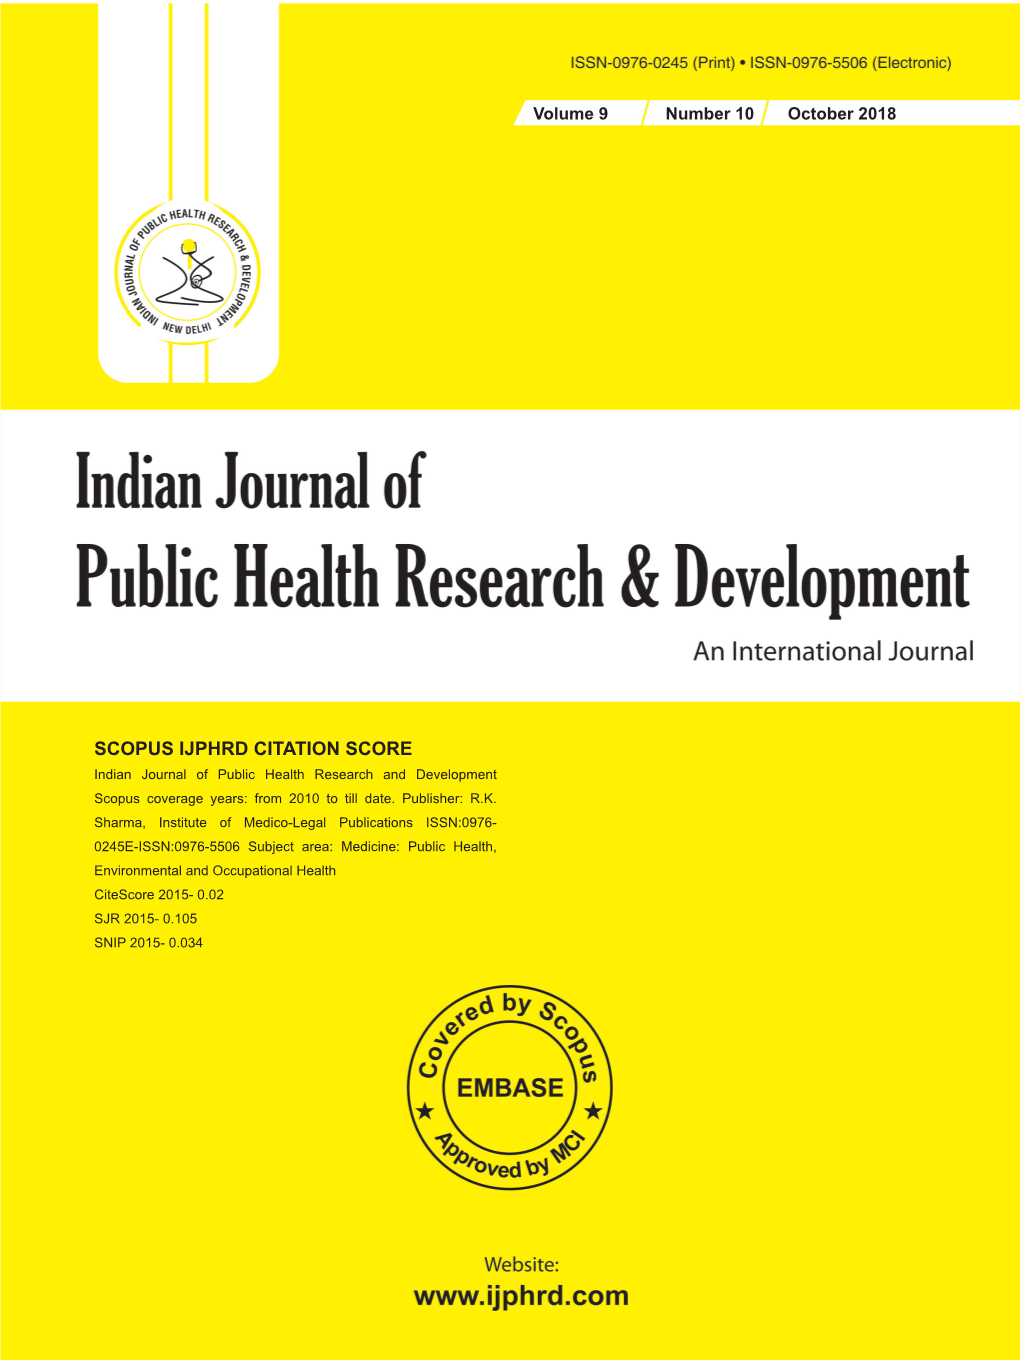 SCOPUS IJPHRD CITATION SCORE Indian Journal of Public Health Research and Development Scopus Coverage Years: from 2010 to Till Date